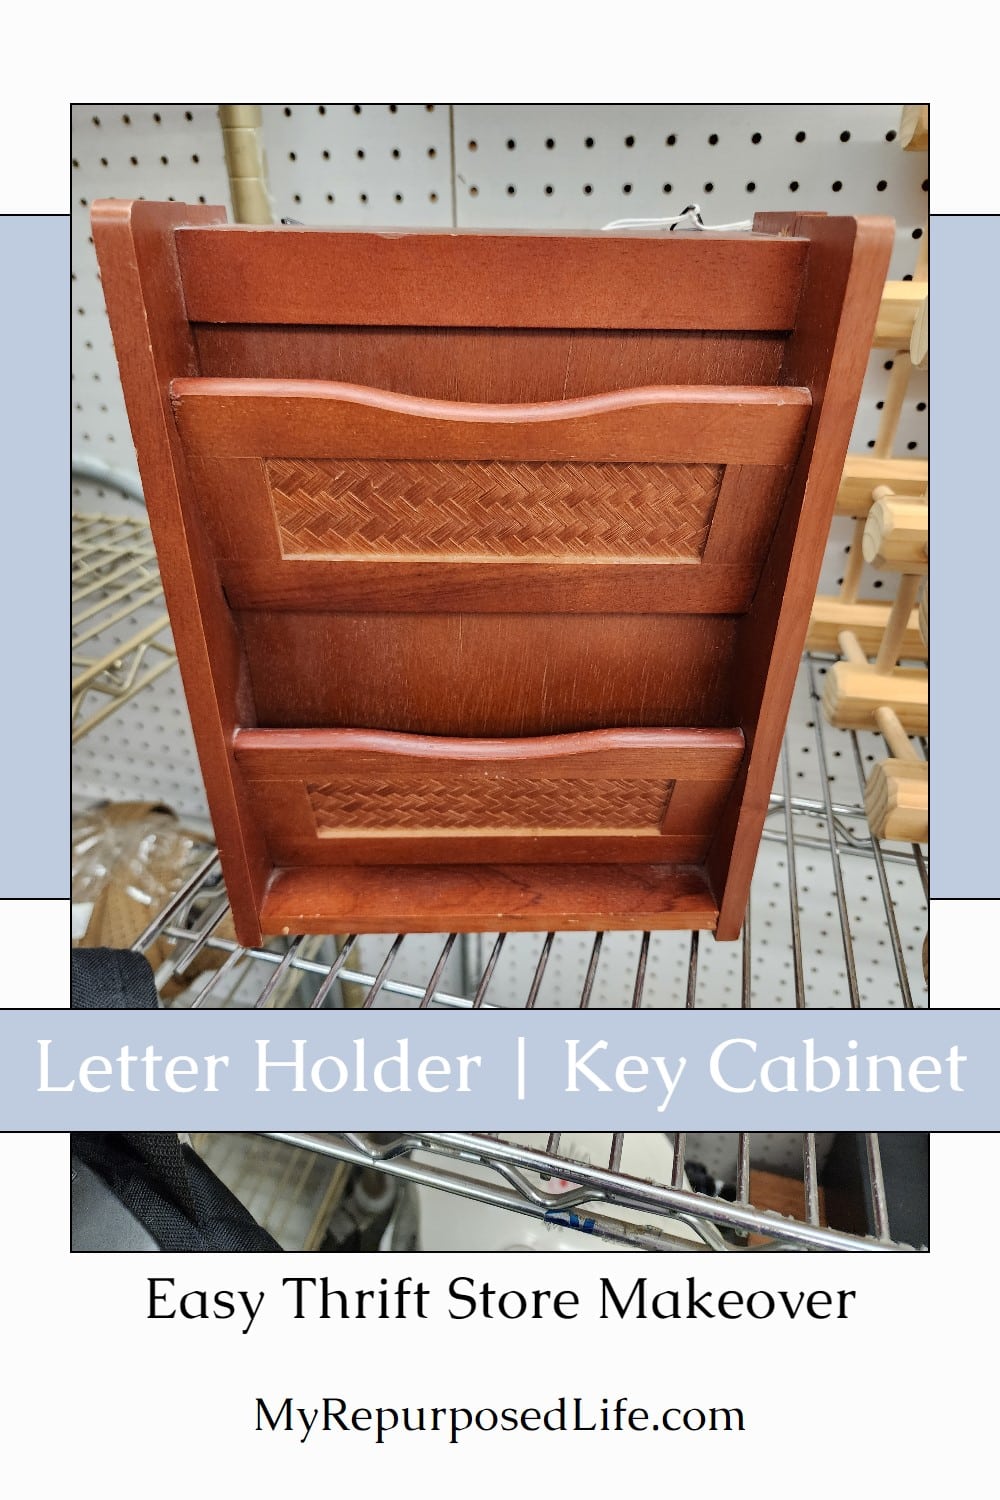 Fun and easy thrift store makeover on a letter holder - key cabinet. Tips for cleaning, painting, and embellishing. Eight bonus projects! via @repurposedlife